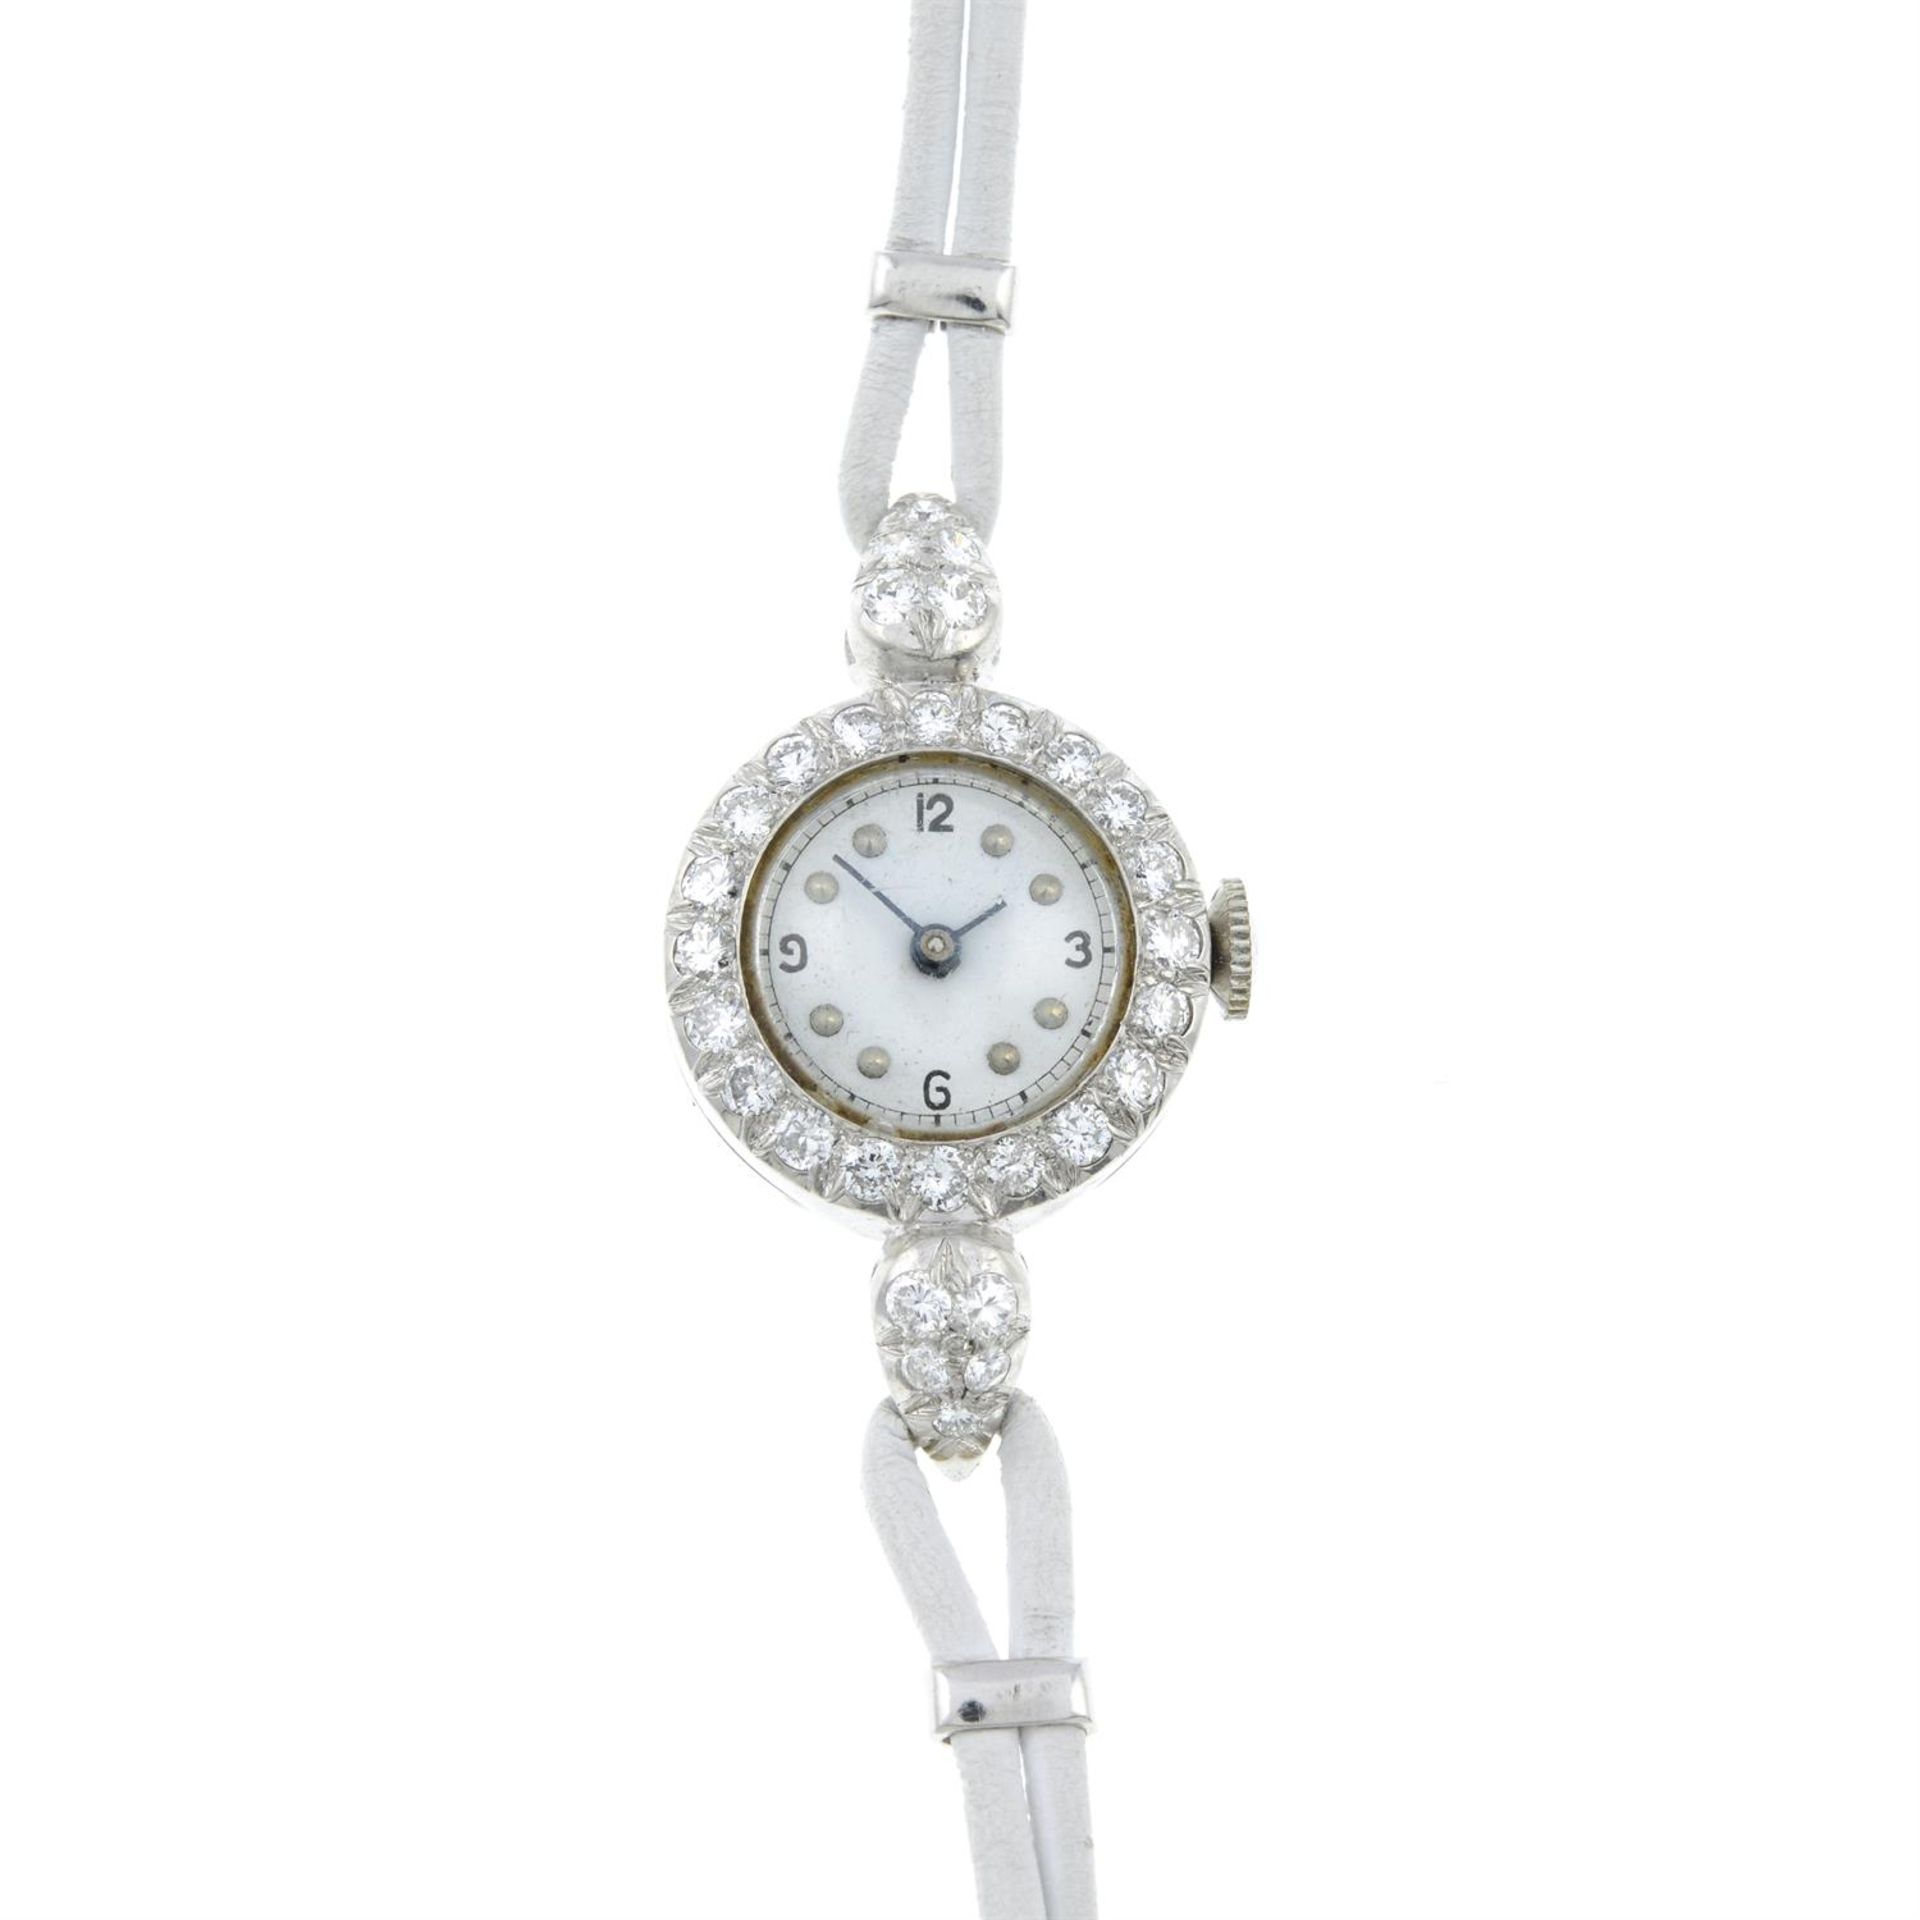 A diamond cocktail watch, with a white leather strap.